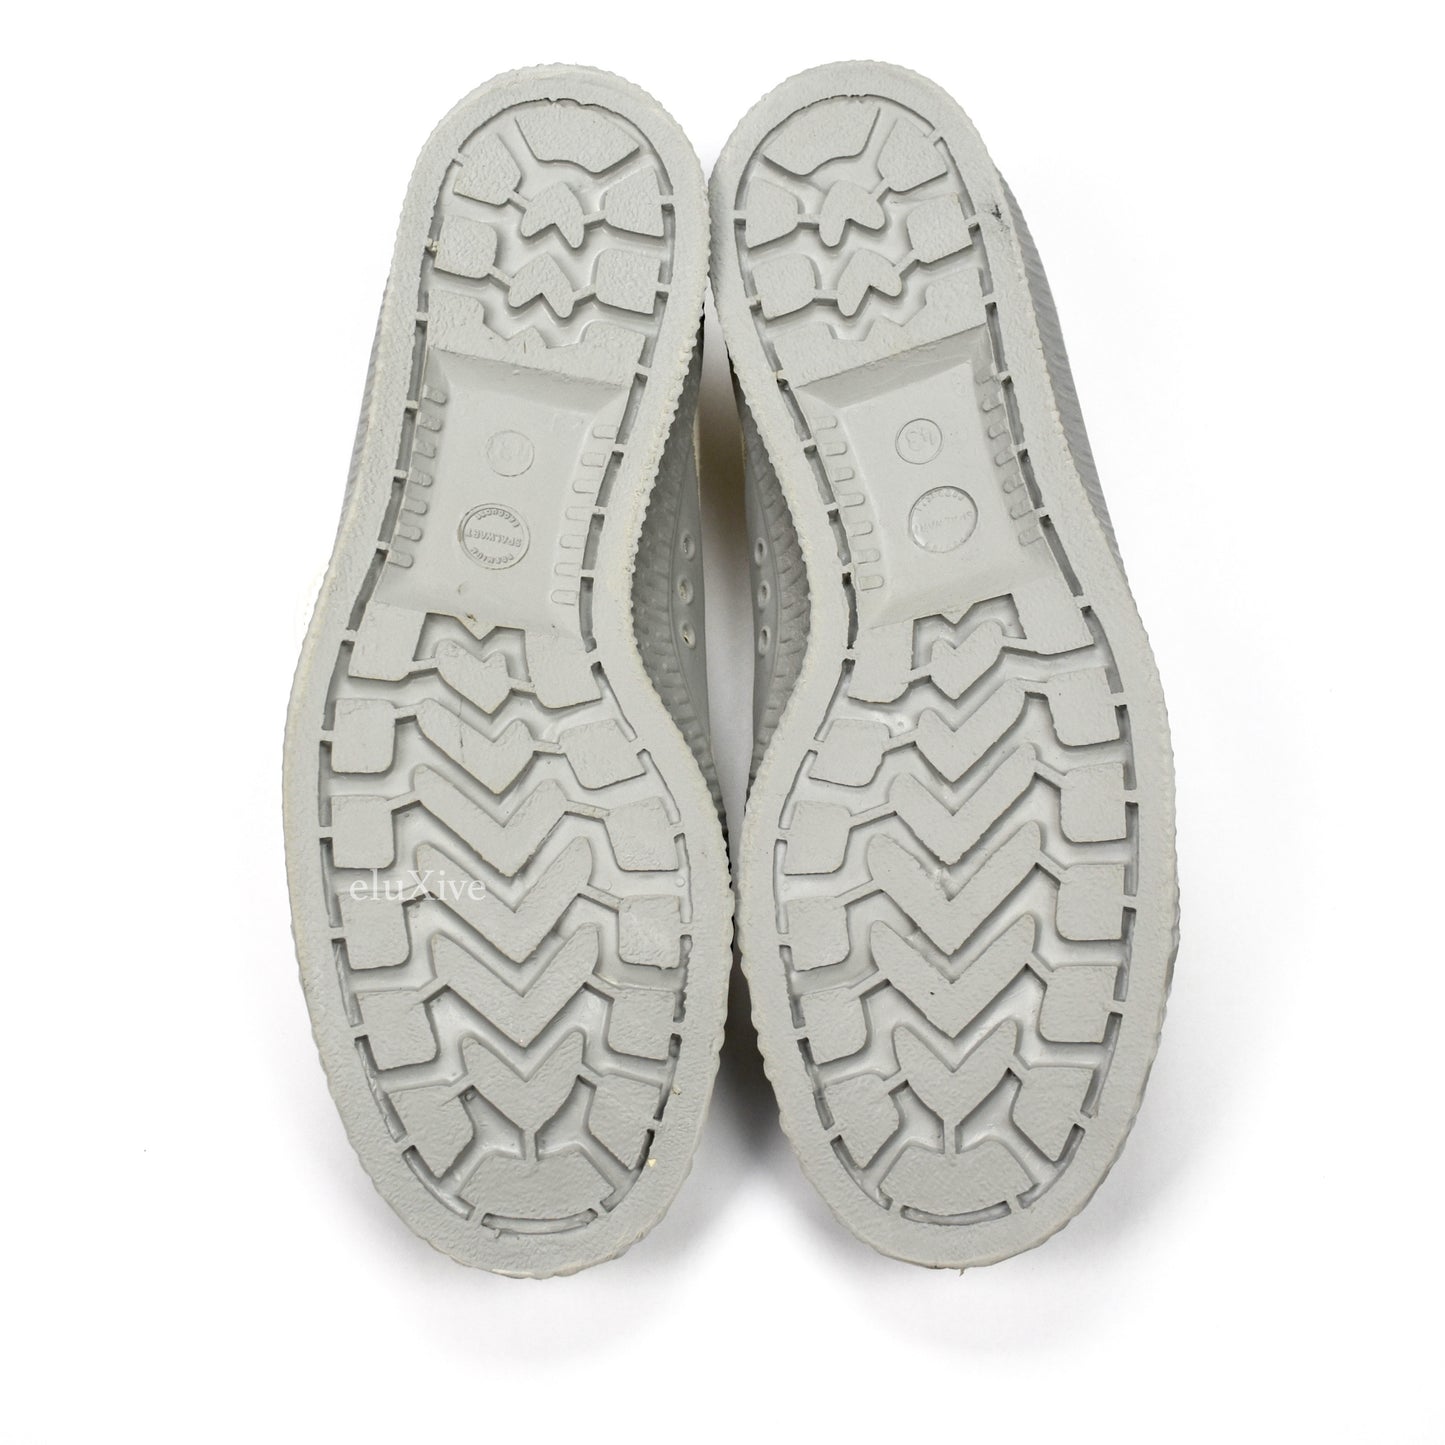 Spalwart - White / Gray 'Special Low' Sneakers